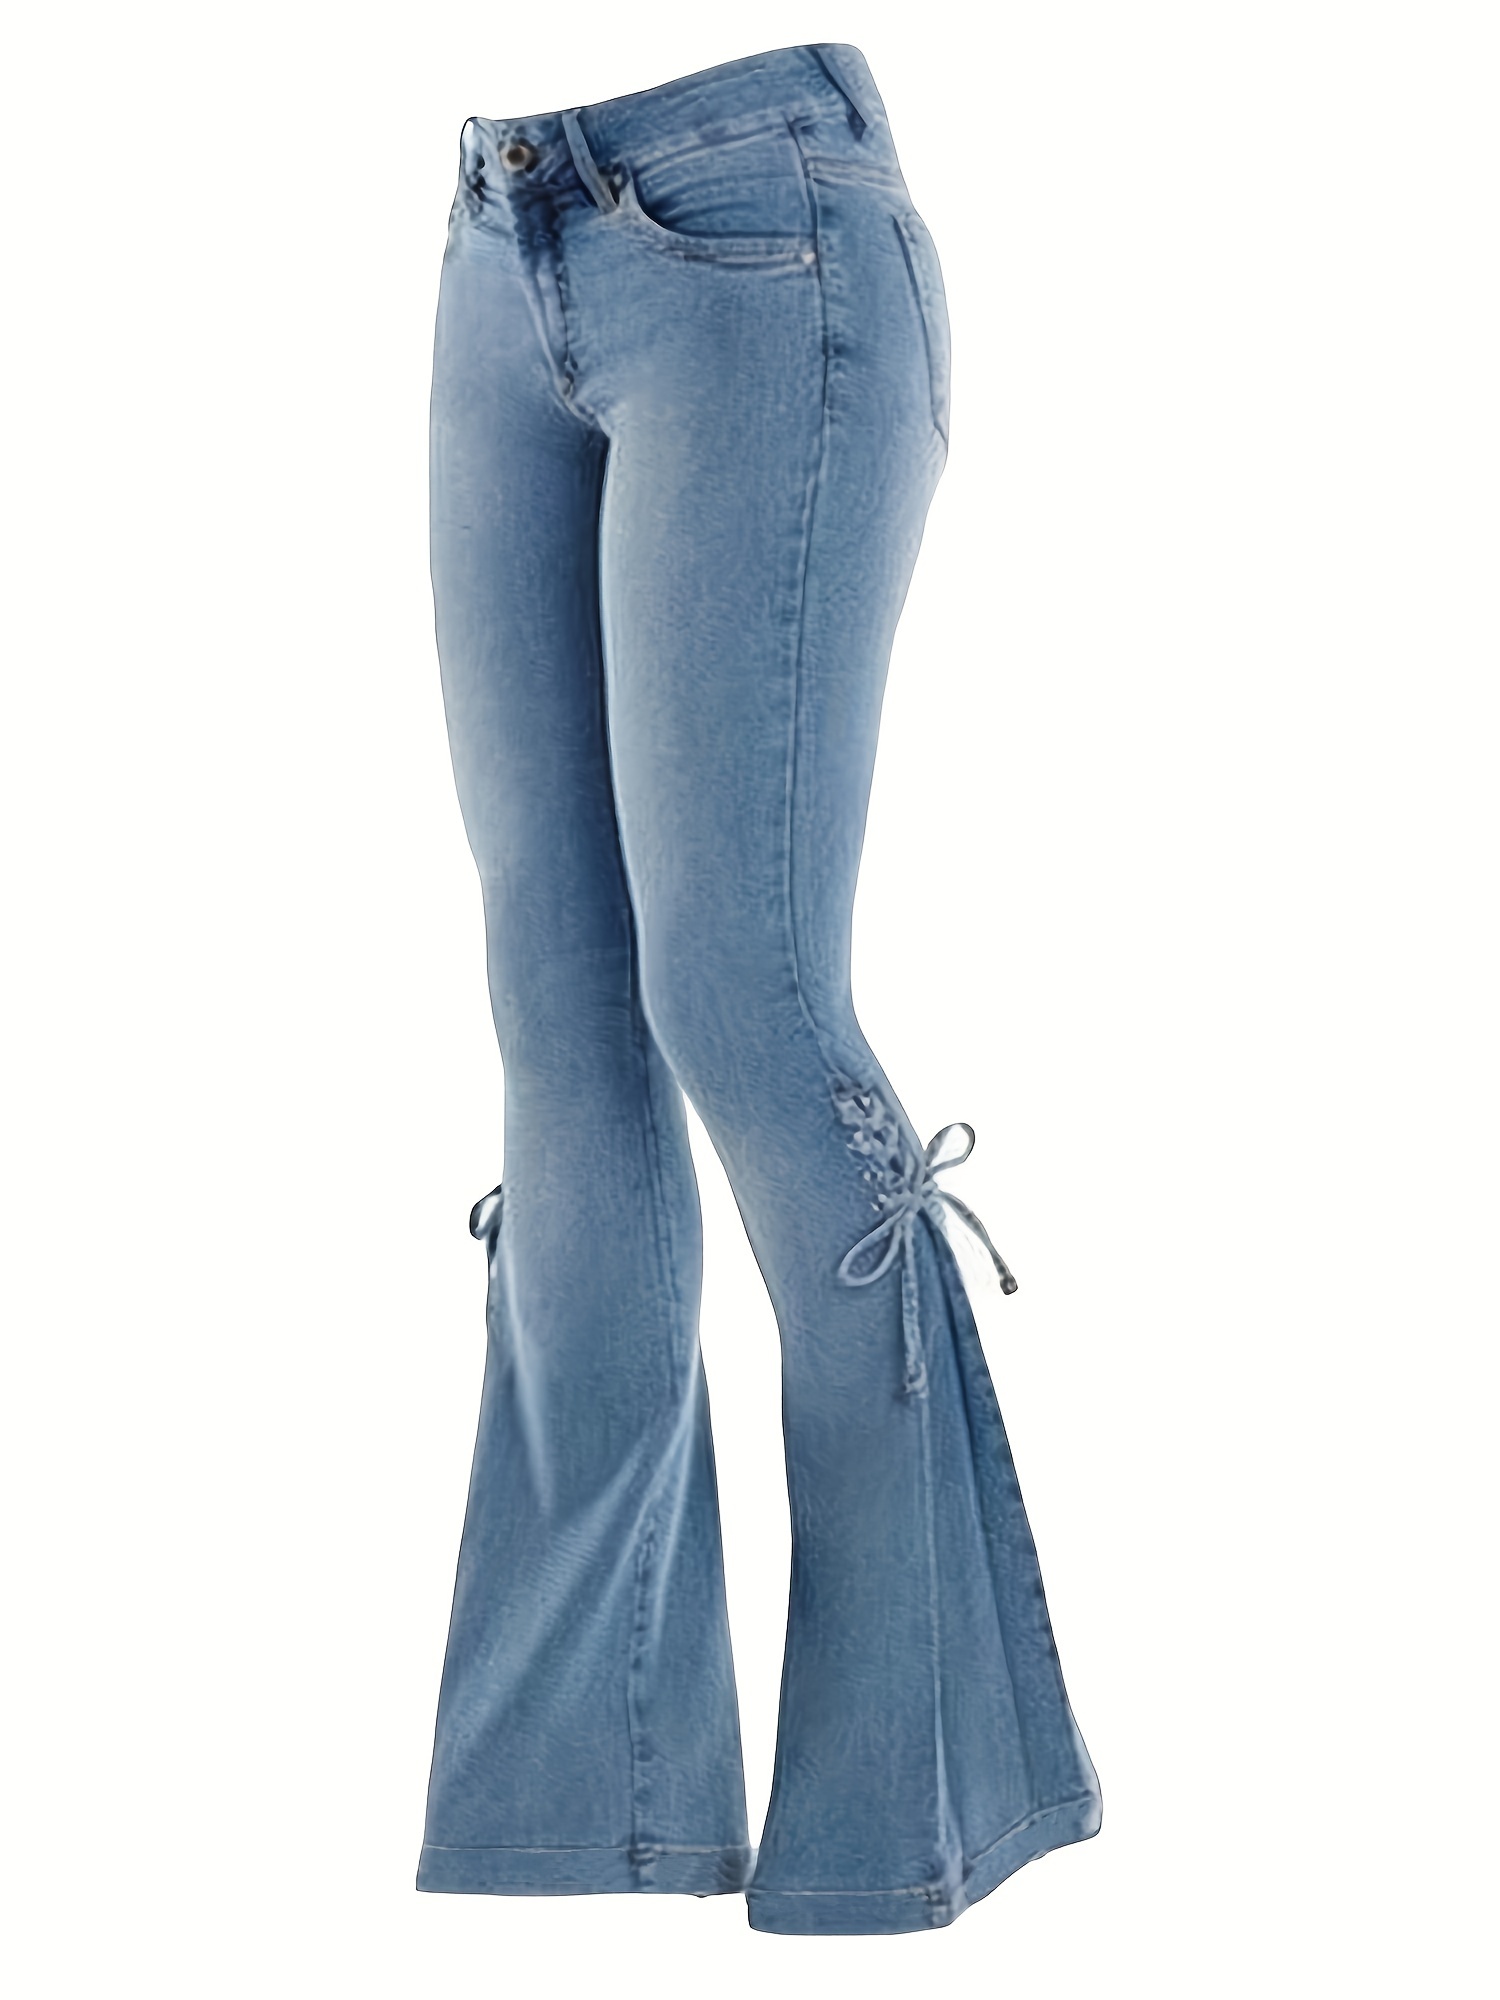 Women Jeans High Waisted Stretchy Layered Ruffle Bell Bottom Wide